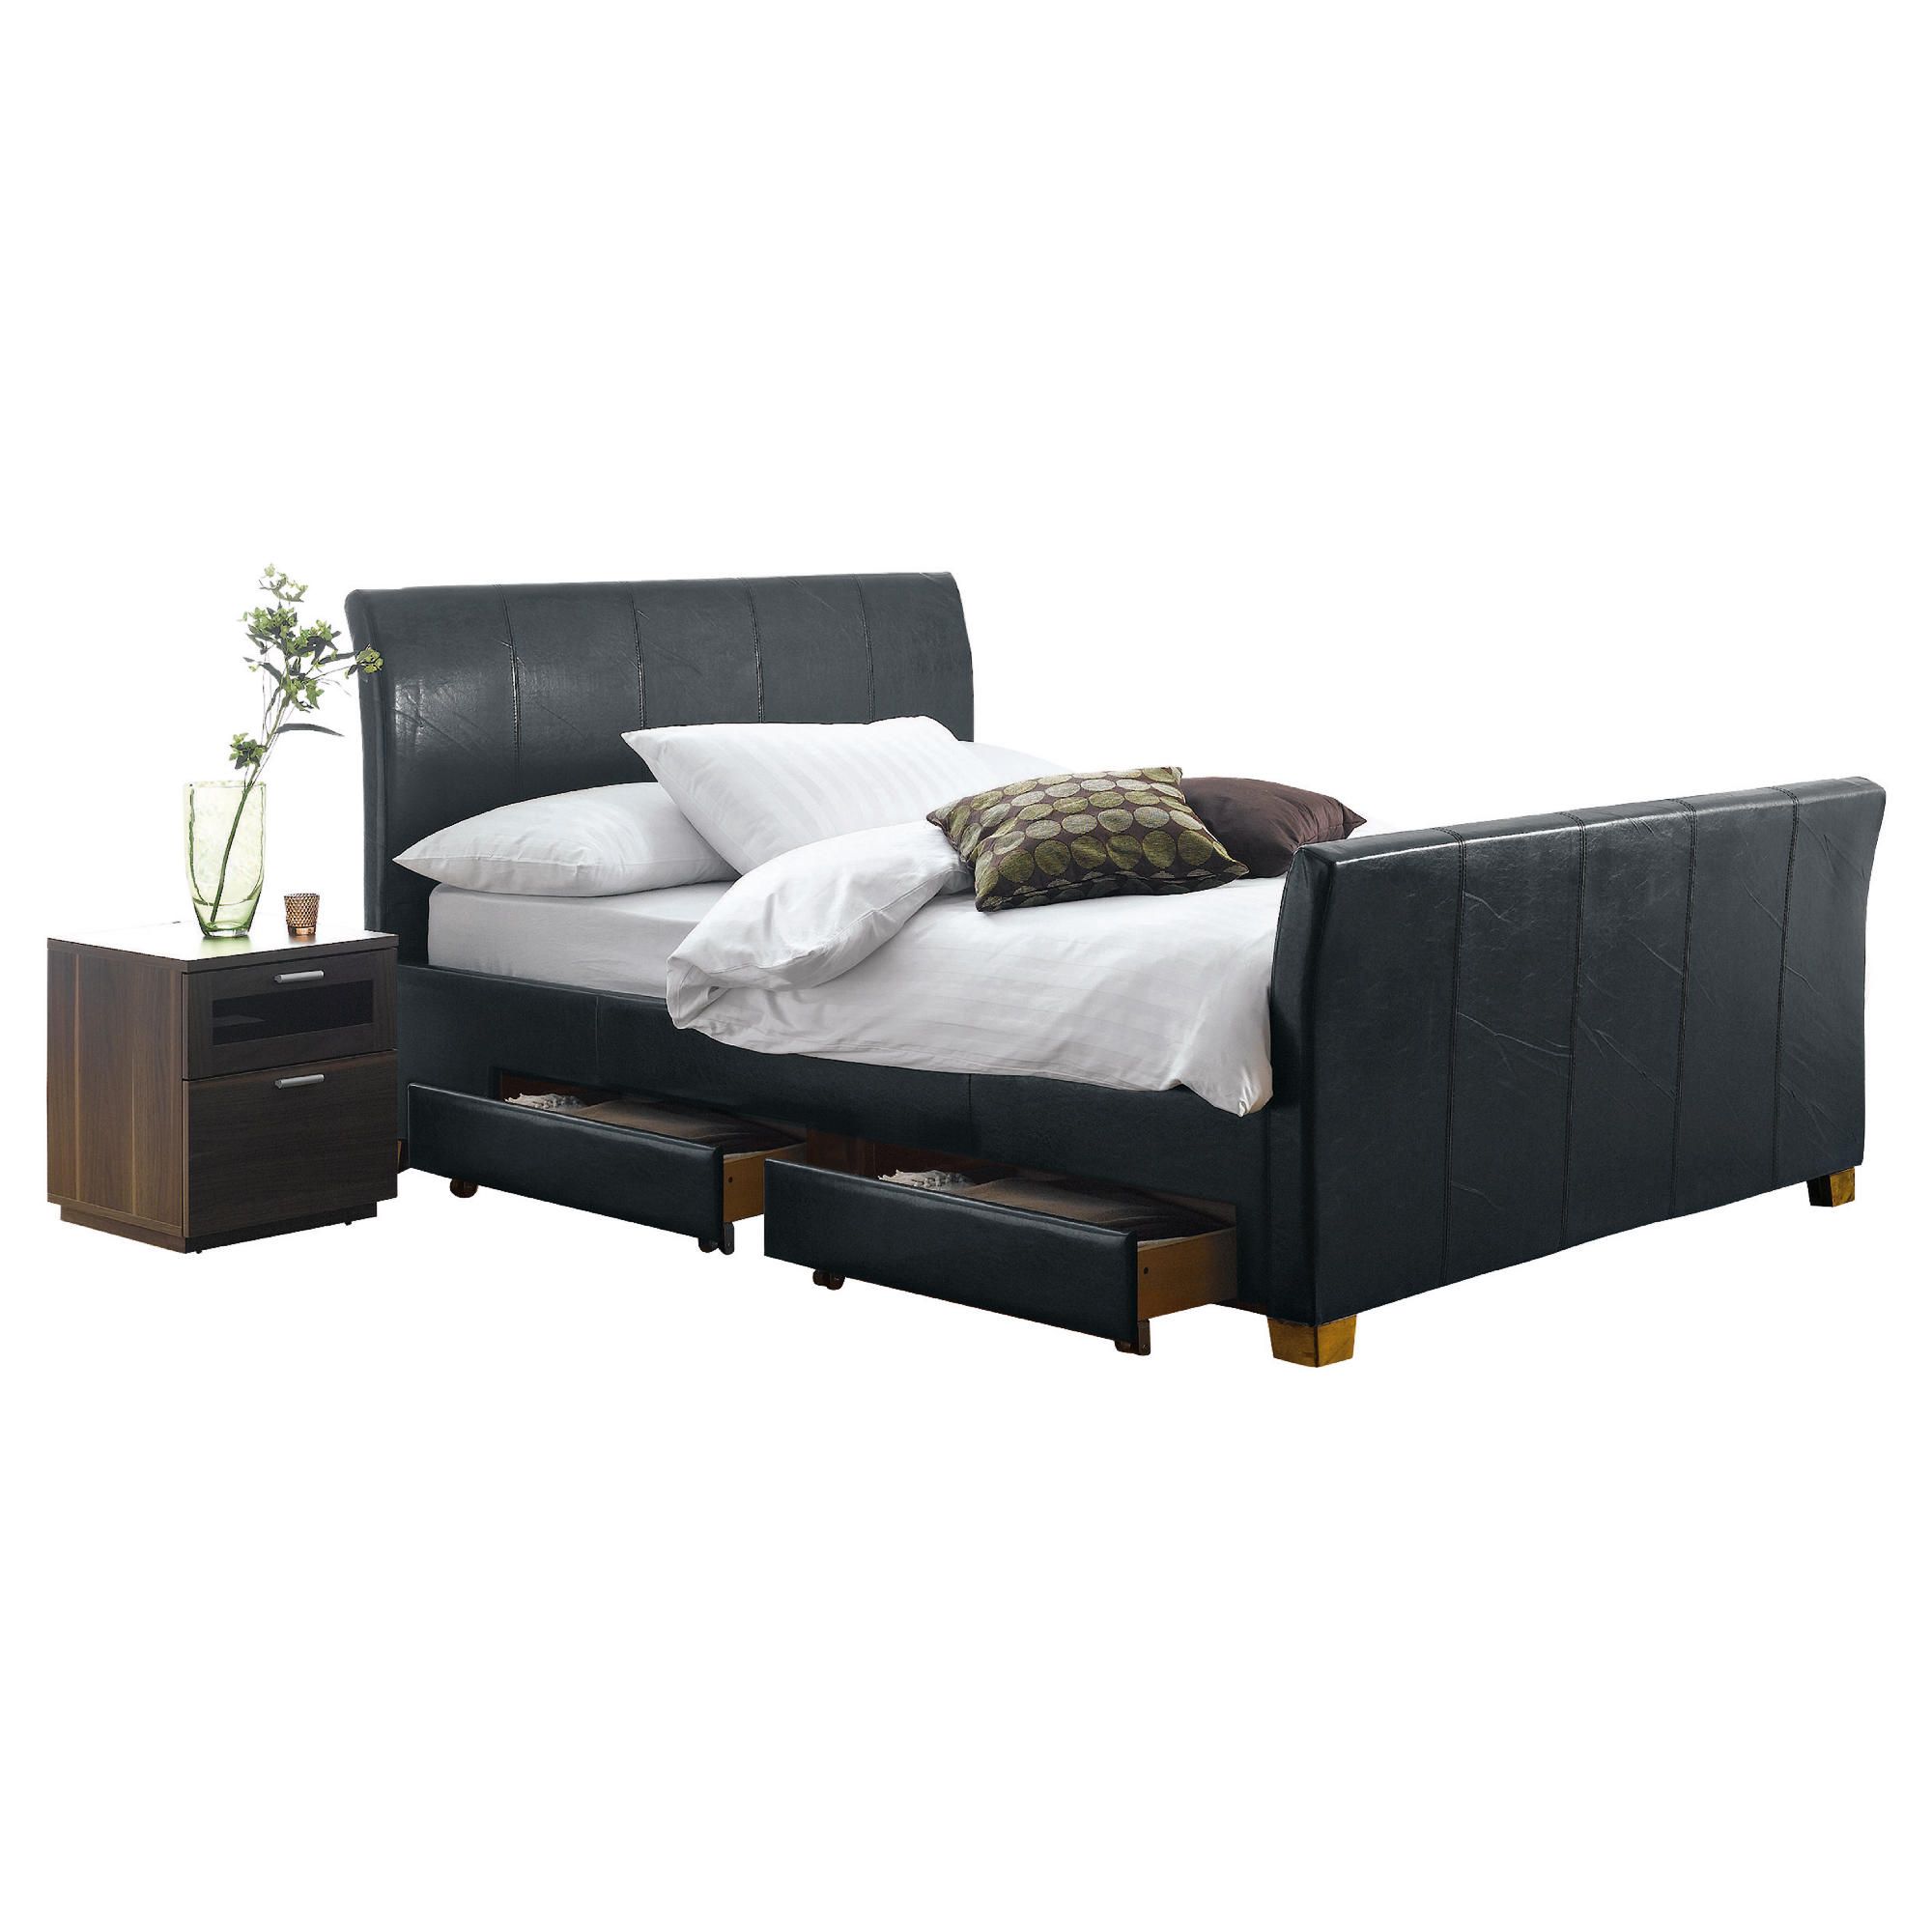 Rayne Double Faux Leather Bed Frame with 4 Drawers, Black at Tesco Direct